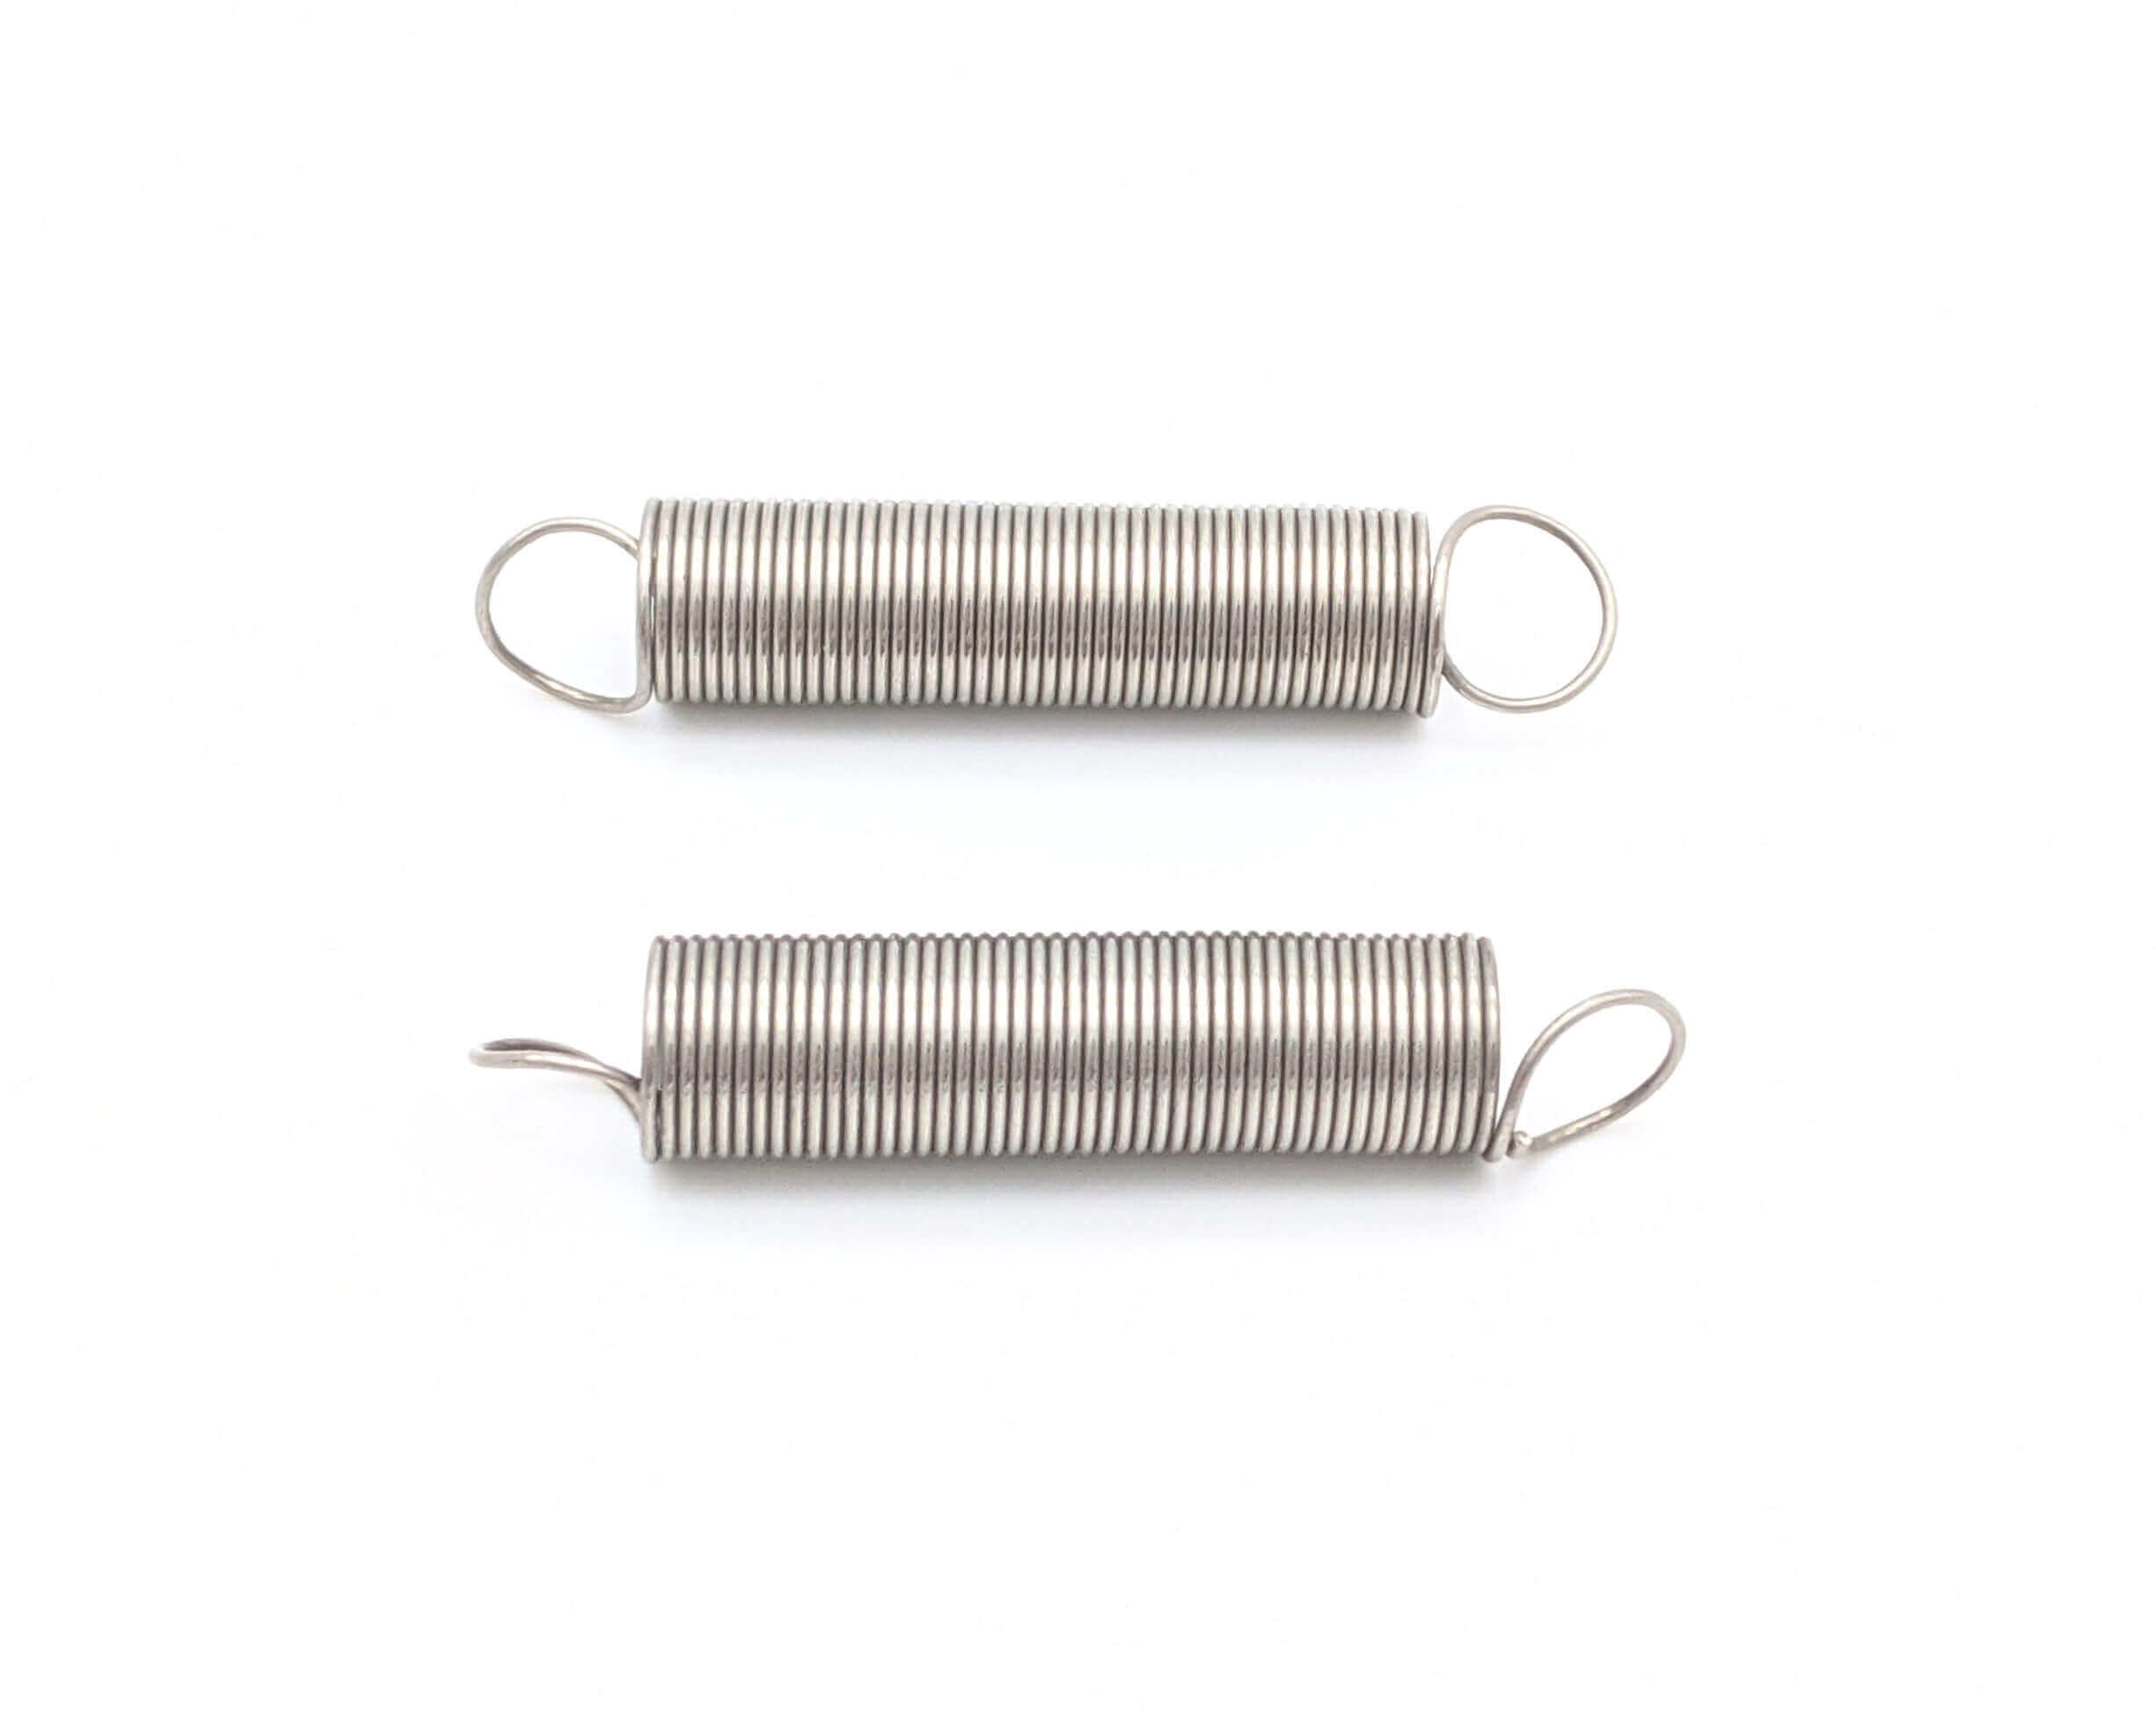 3mm Wire Diameter X 25mm Out Diameter X mm Length Multipurpose DINGGUANGHE-CUP Extension Springs Big Heavy Duty Long Extension Coil Springs/Tension Spring Size : 3x25x160mm 150-300 